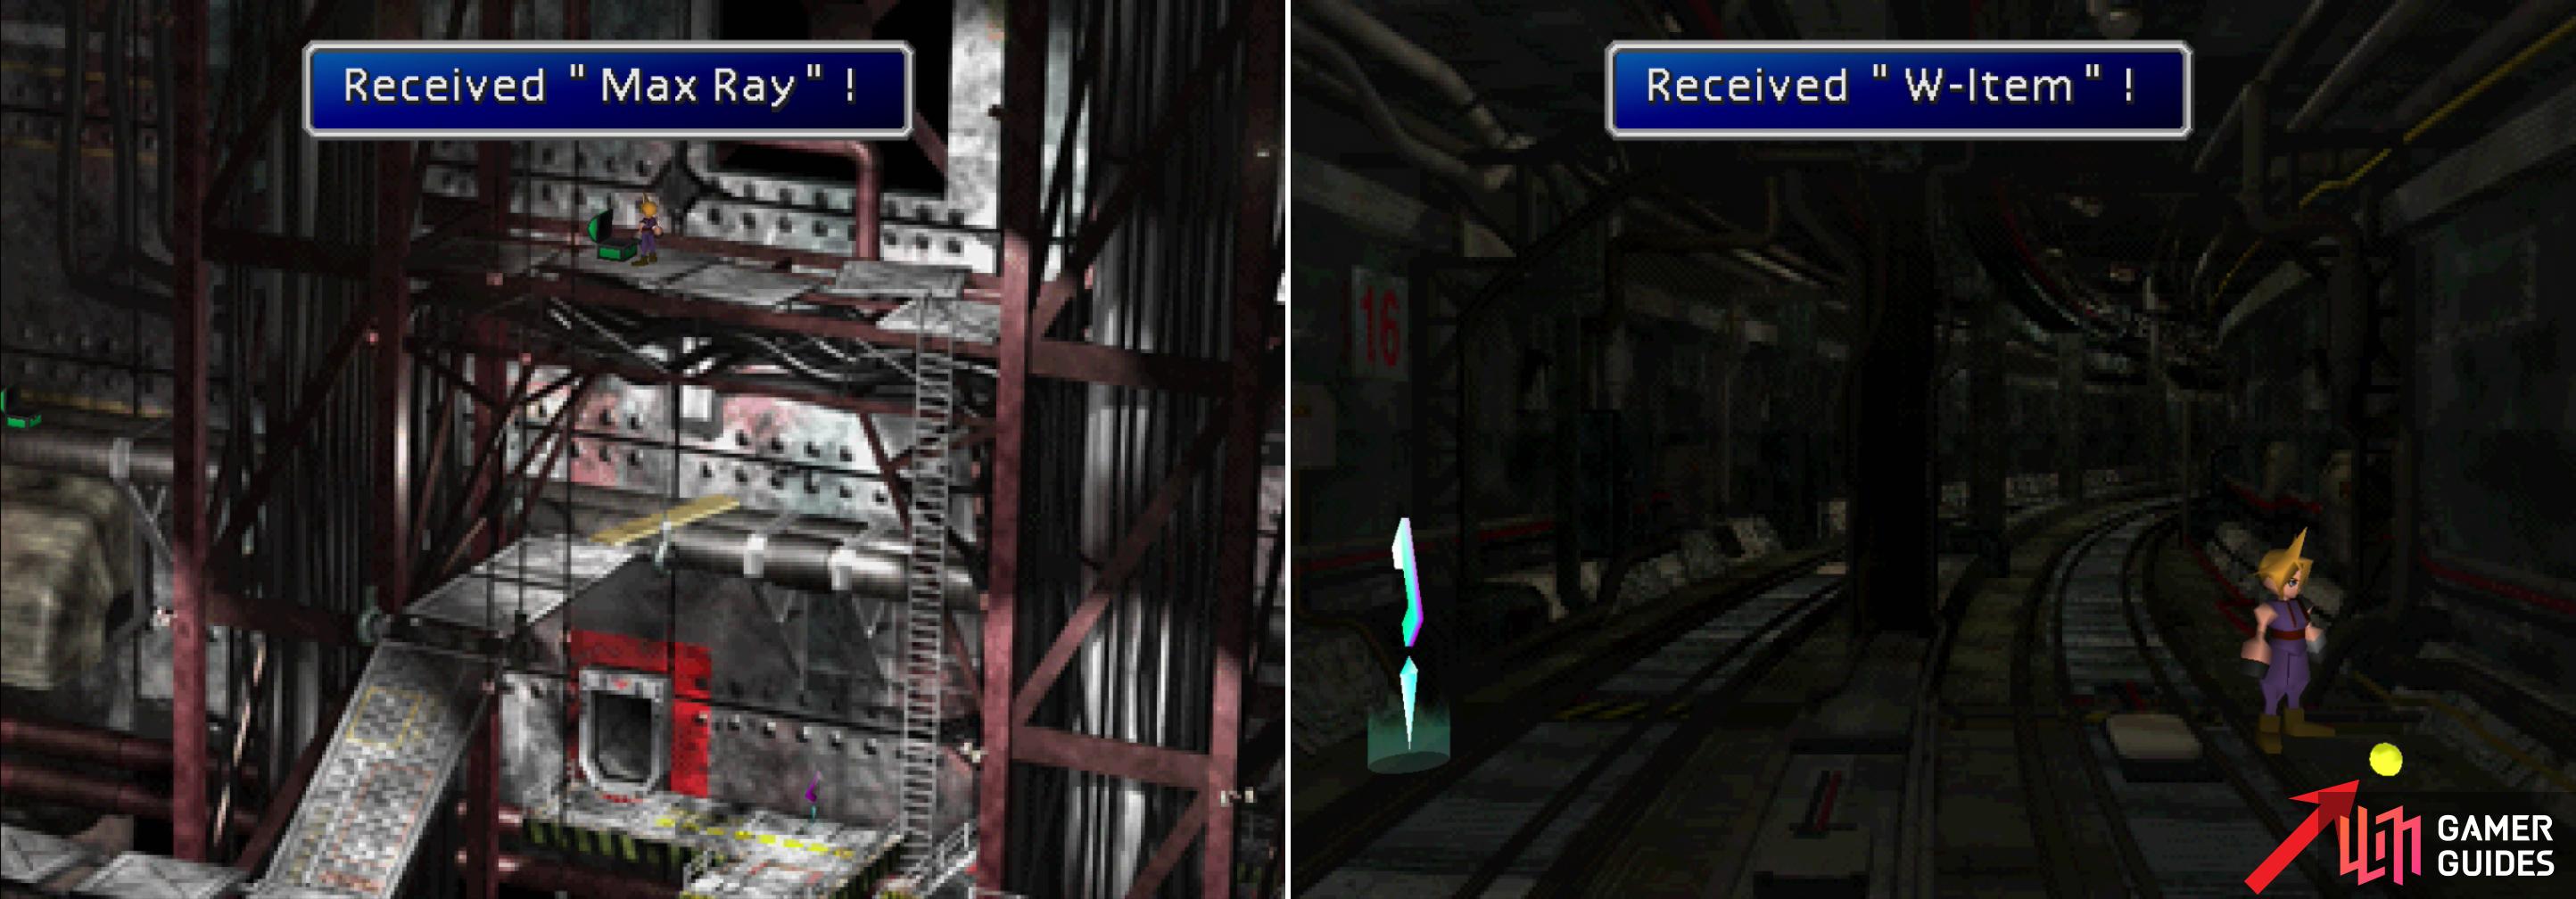 Near the end of the Sector 8, Underground area you’ll find the Max Ray, one of Barret’s most powerful weapons (left). Explore the Winding Tunnel by heading in the wrong direction to find the W-Item Materia (right).